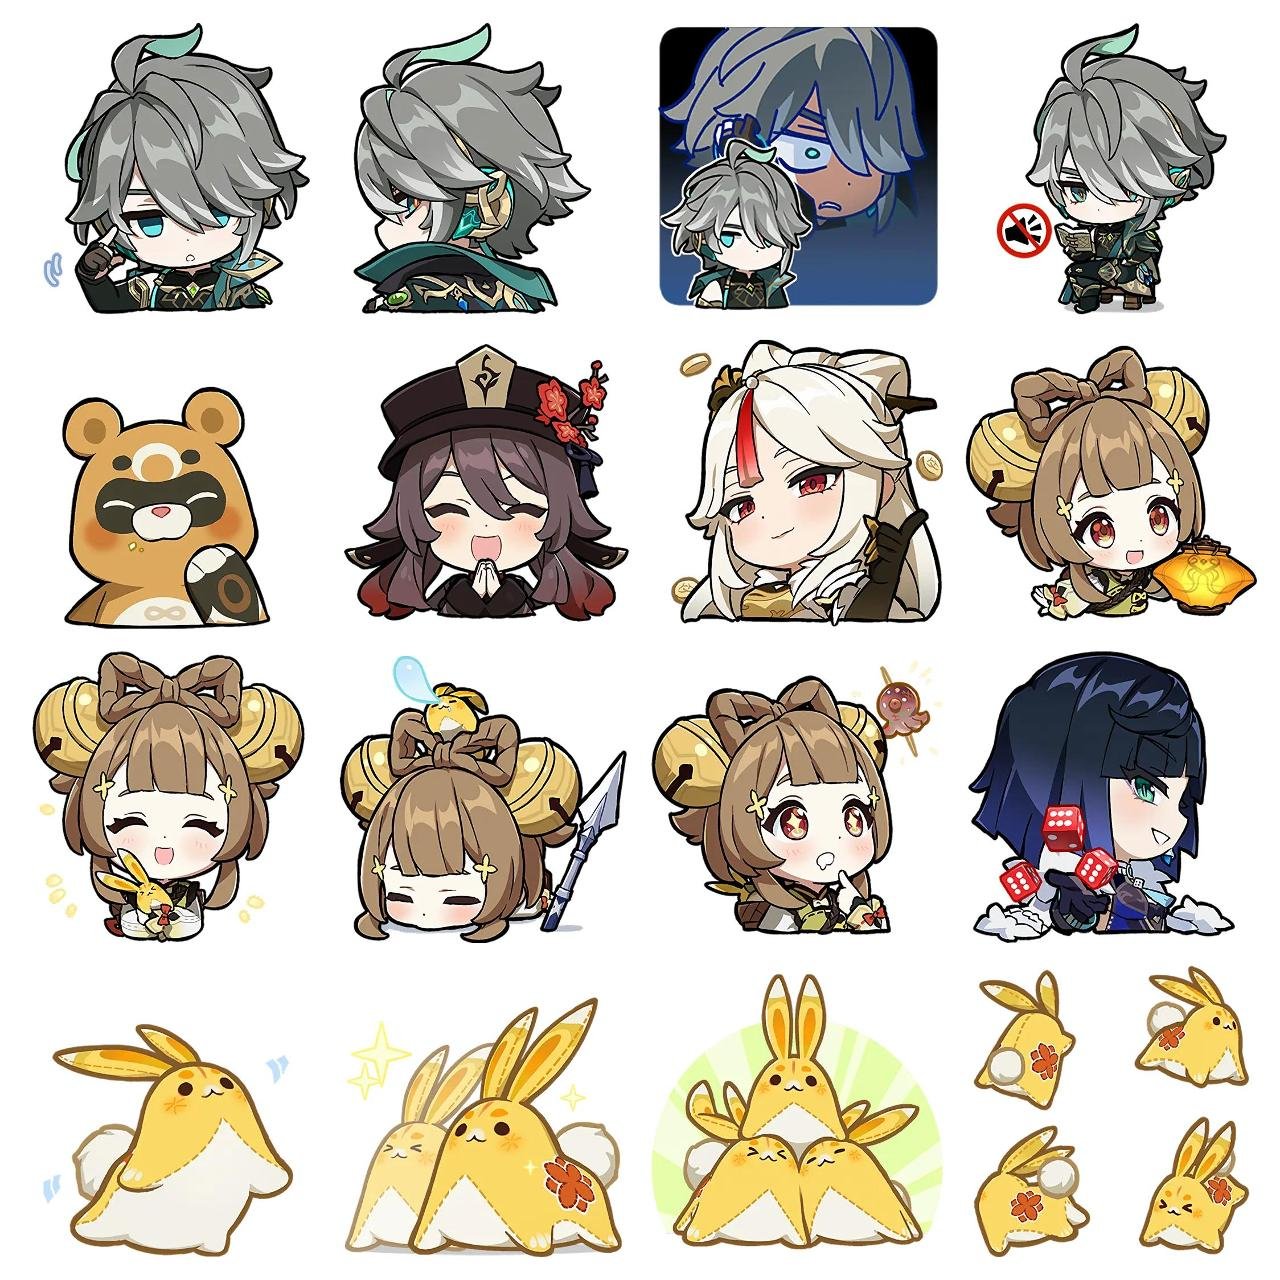 Genshin Impact #28 Anime, Genshin Impact, Game sticker pack for Whatsapp, Telegram, Signal, and others chatting and message apps